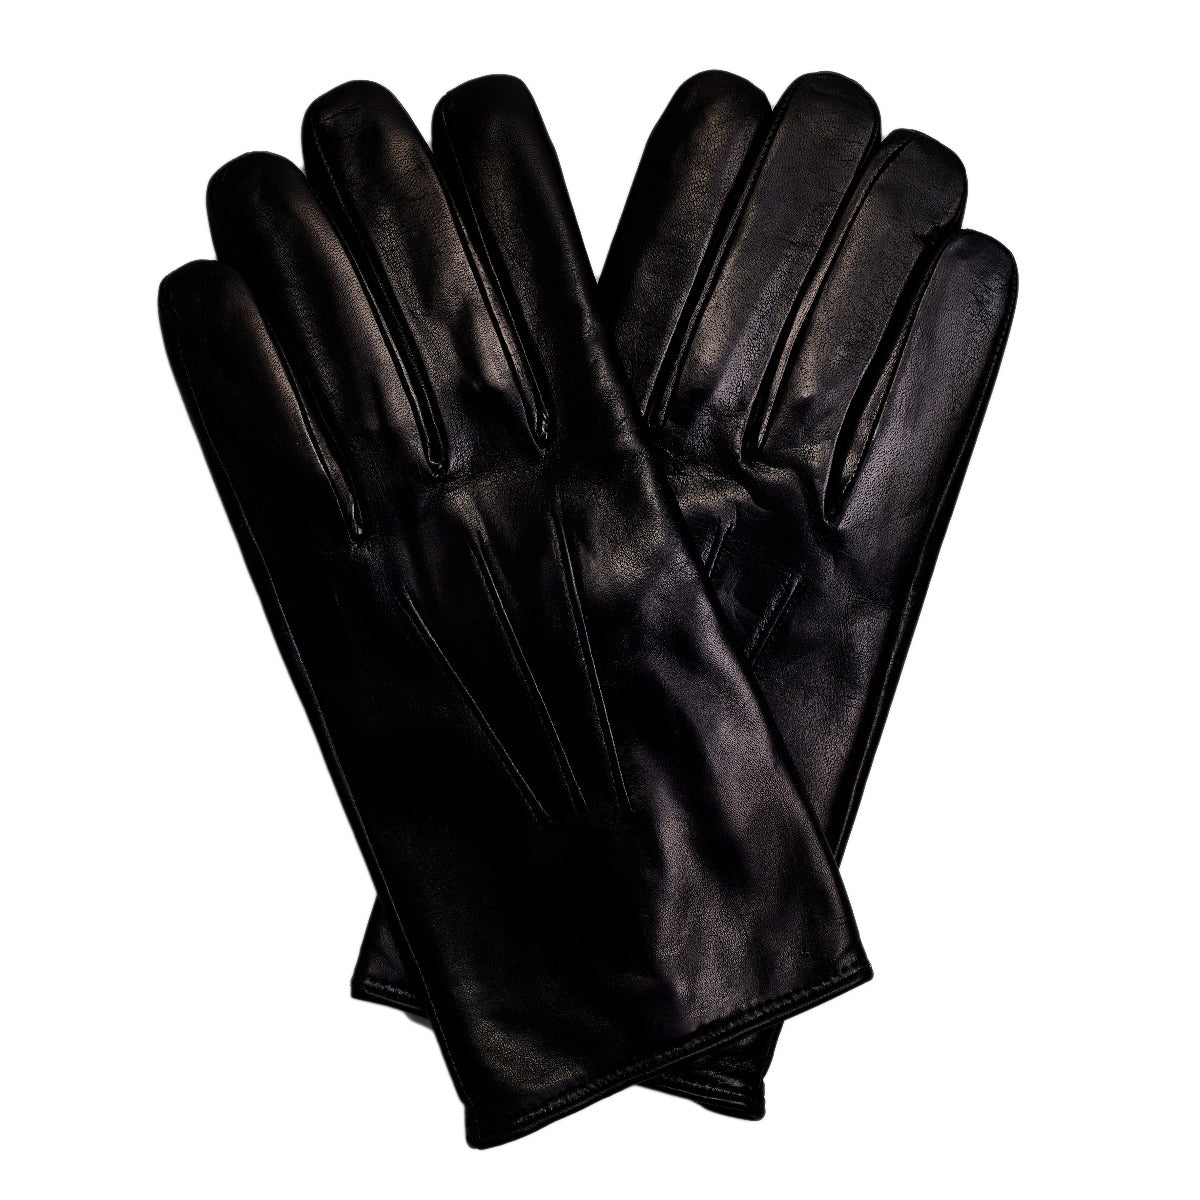 A pair of formal Sovereign Grade Black Nappa Leather Gloves, Cashmere Lined by KirbyAllison.com on a white background.